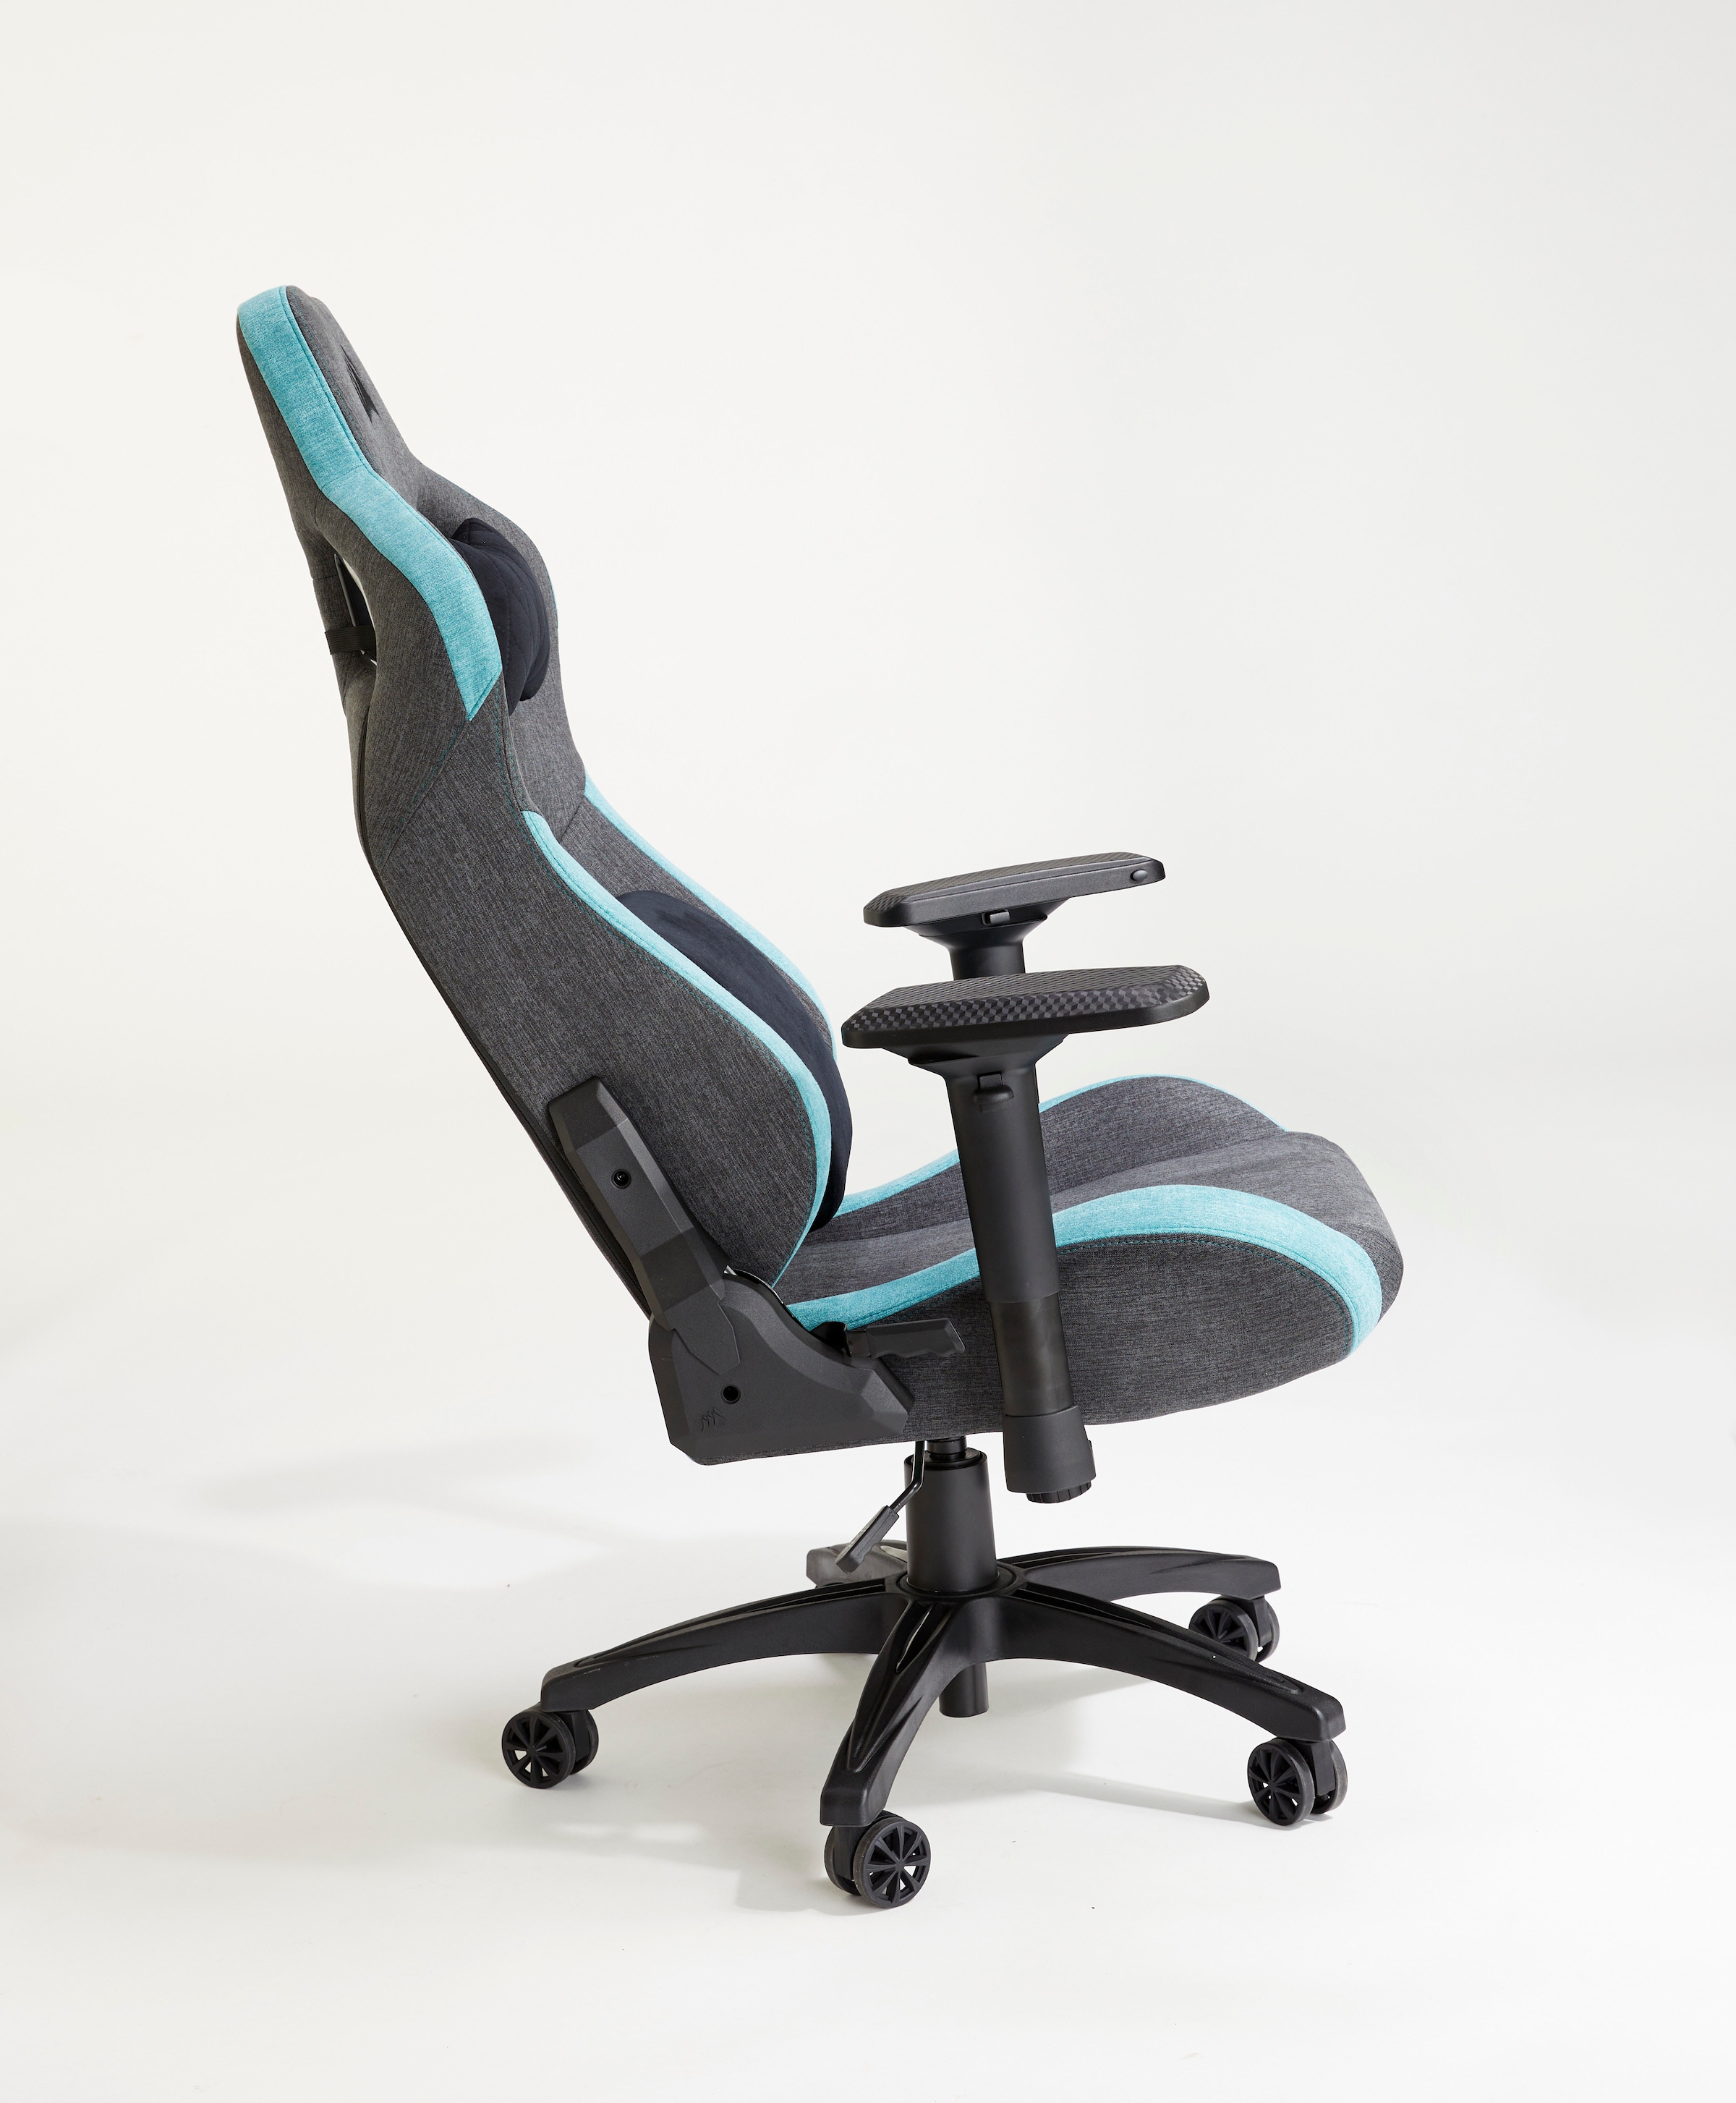 Corsair Gaming Chair »T3 Rush bei Exterior UNIVERSAL Fabric Chair«, Racing-Inspired Fabric Design, online Gaming Soft